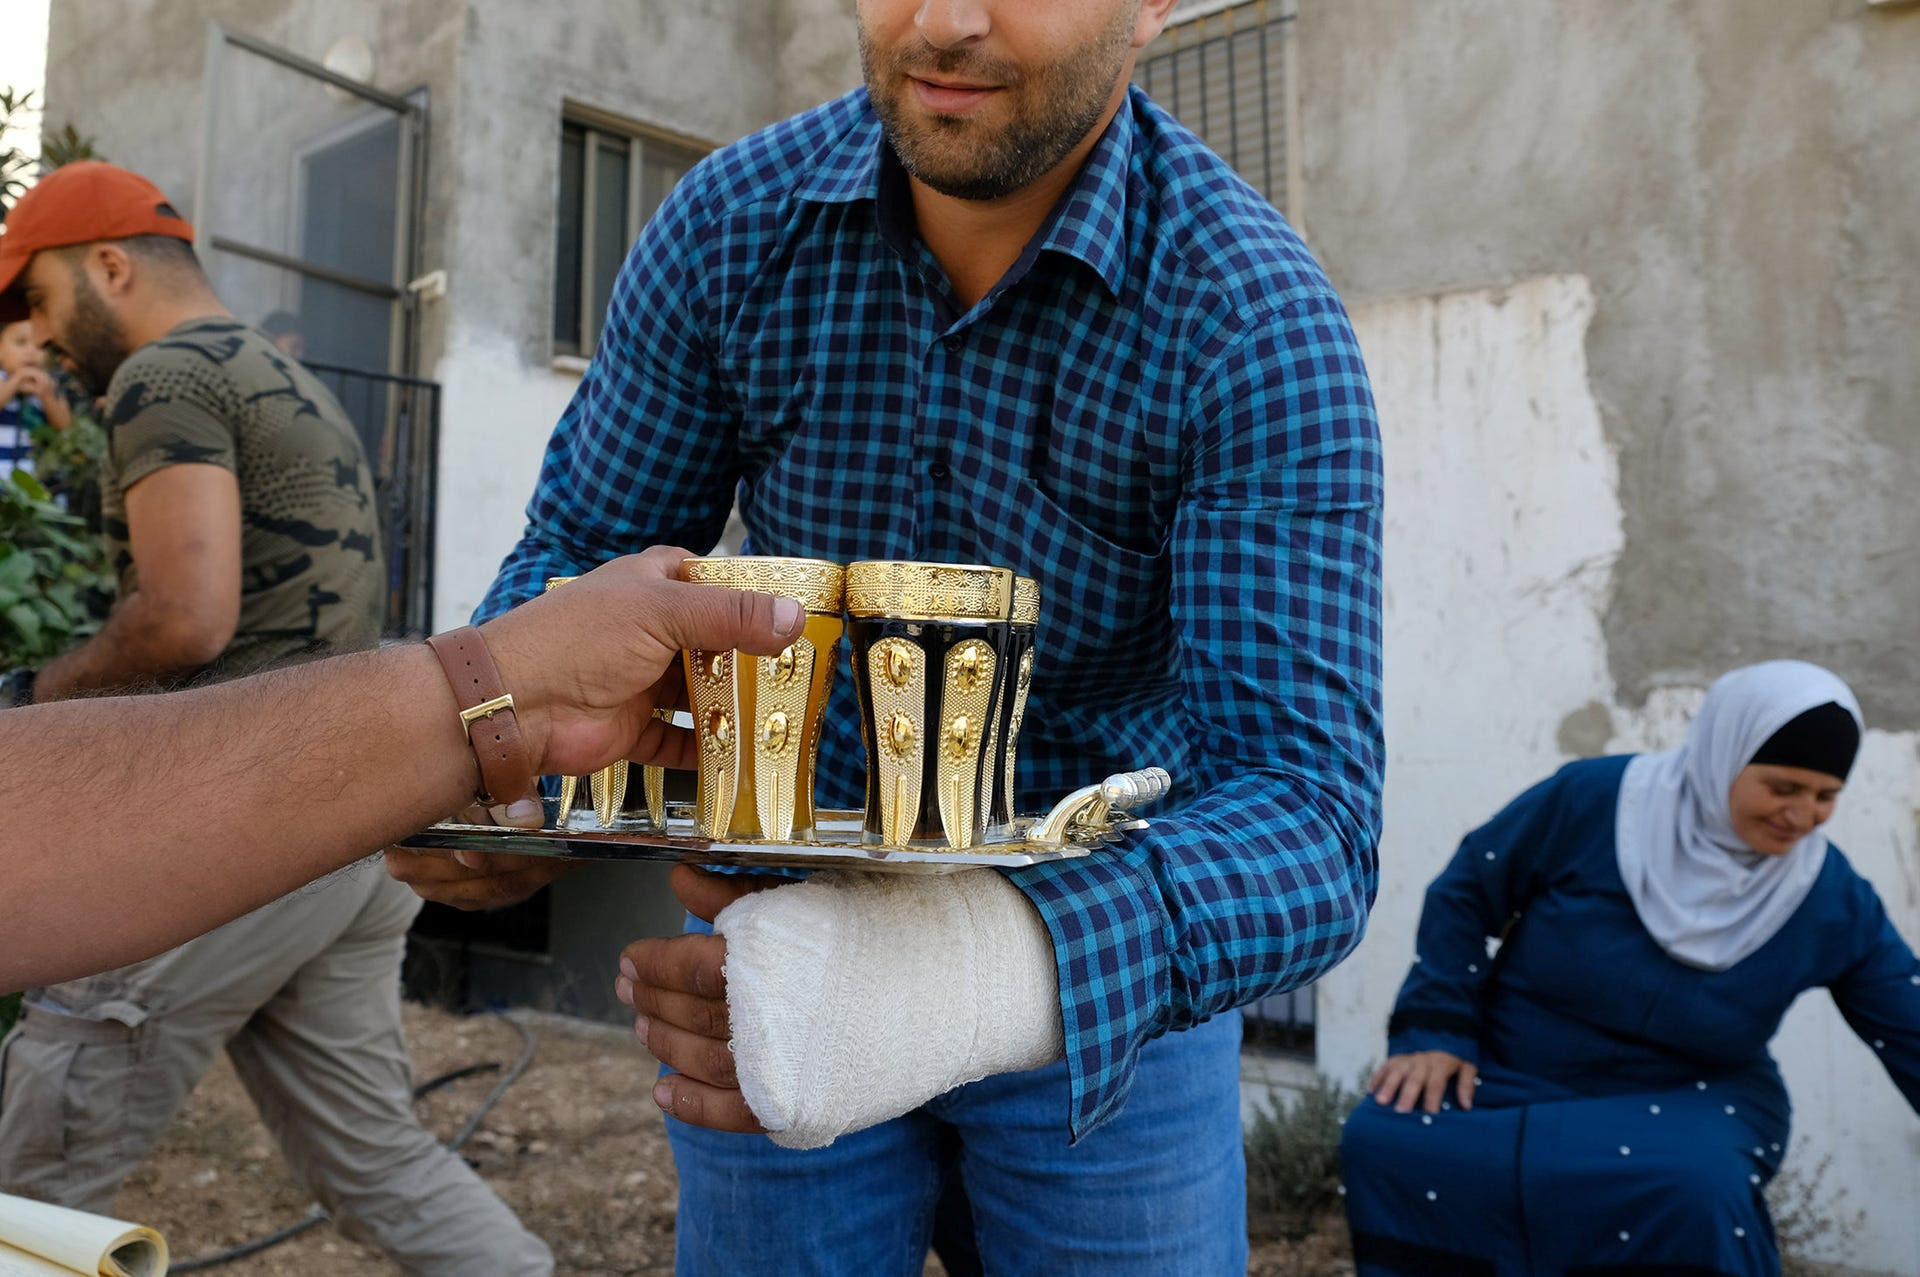 One of Imad Zaben's sons, who asked his name not be used, his hand in a cast.